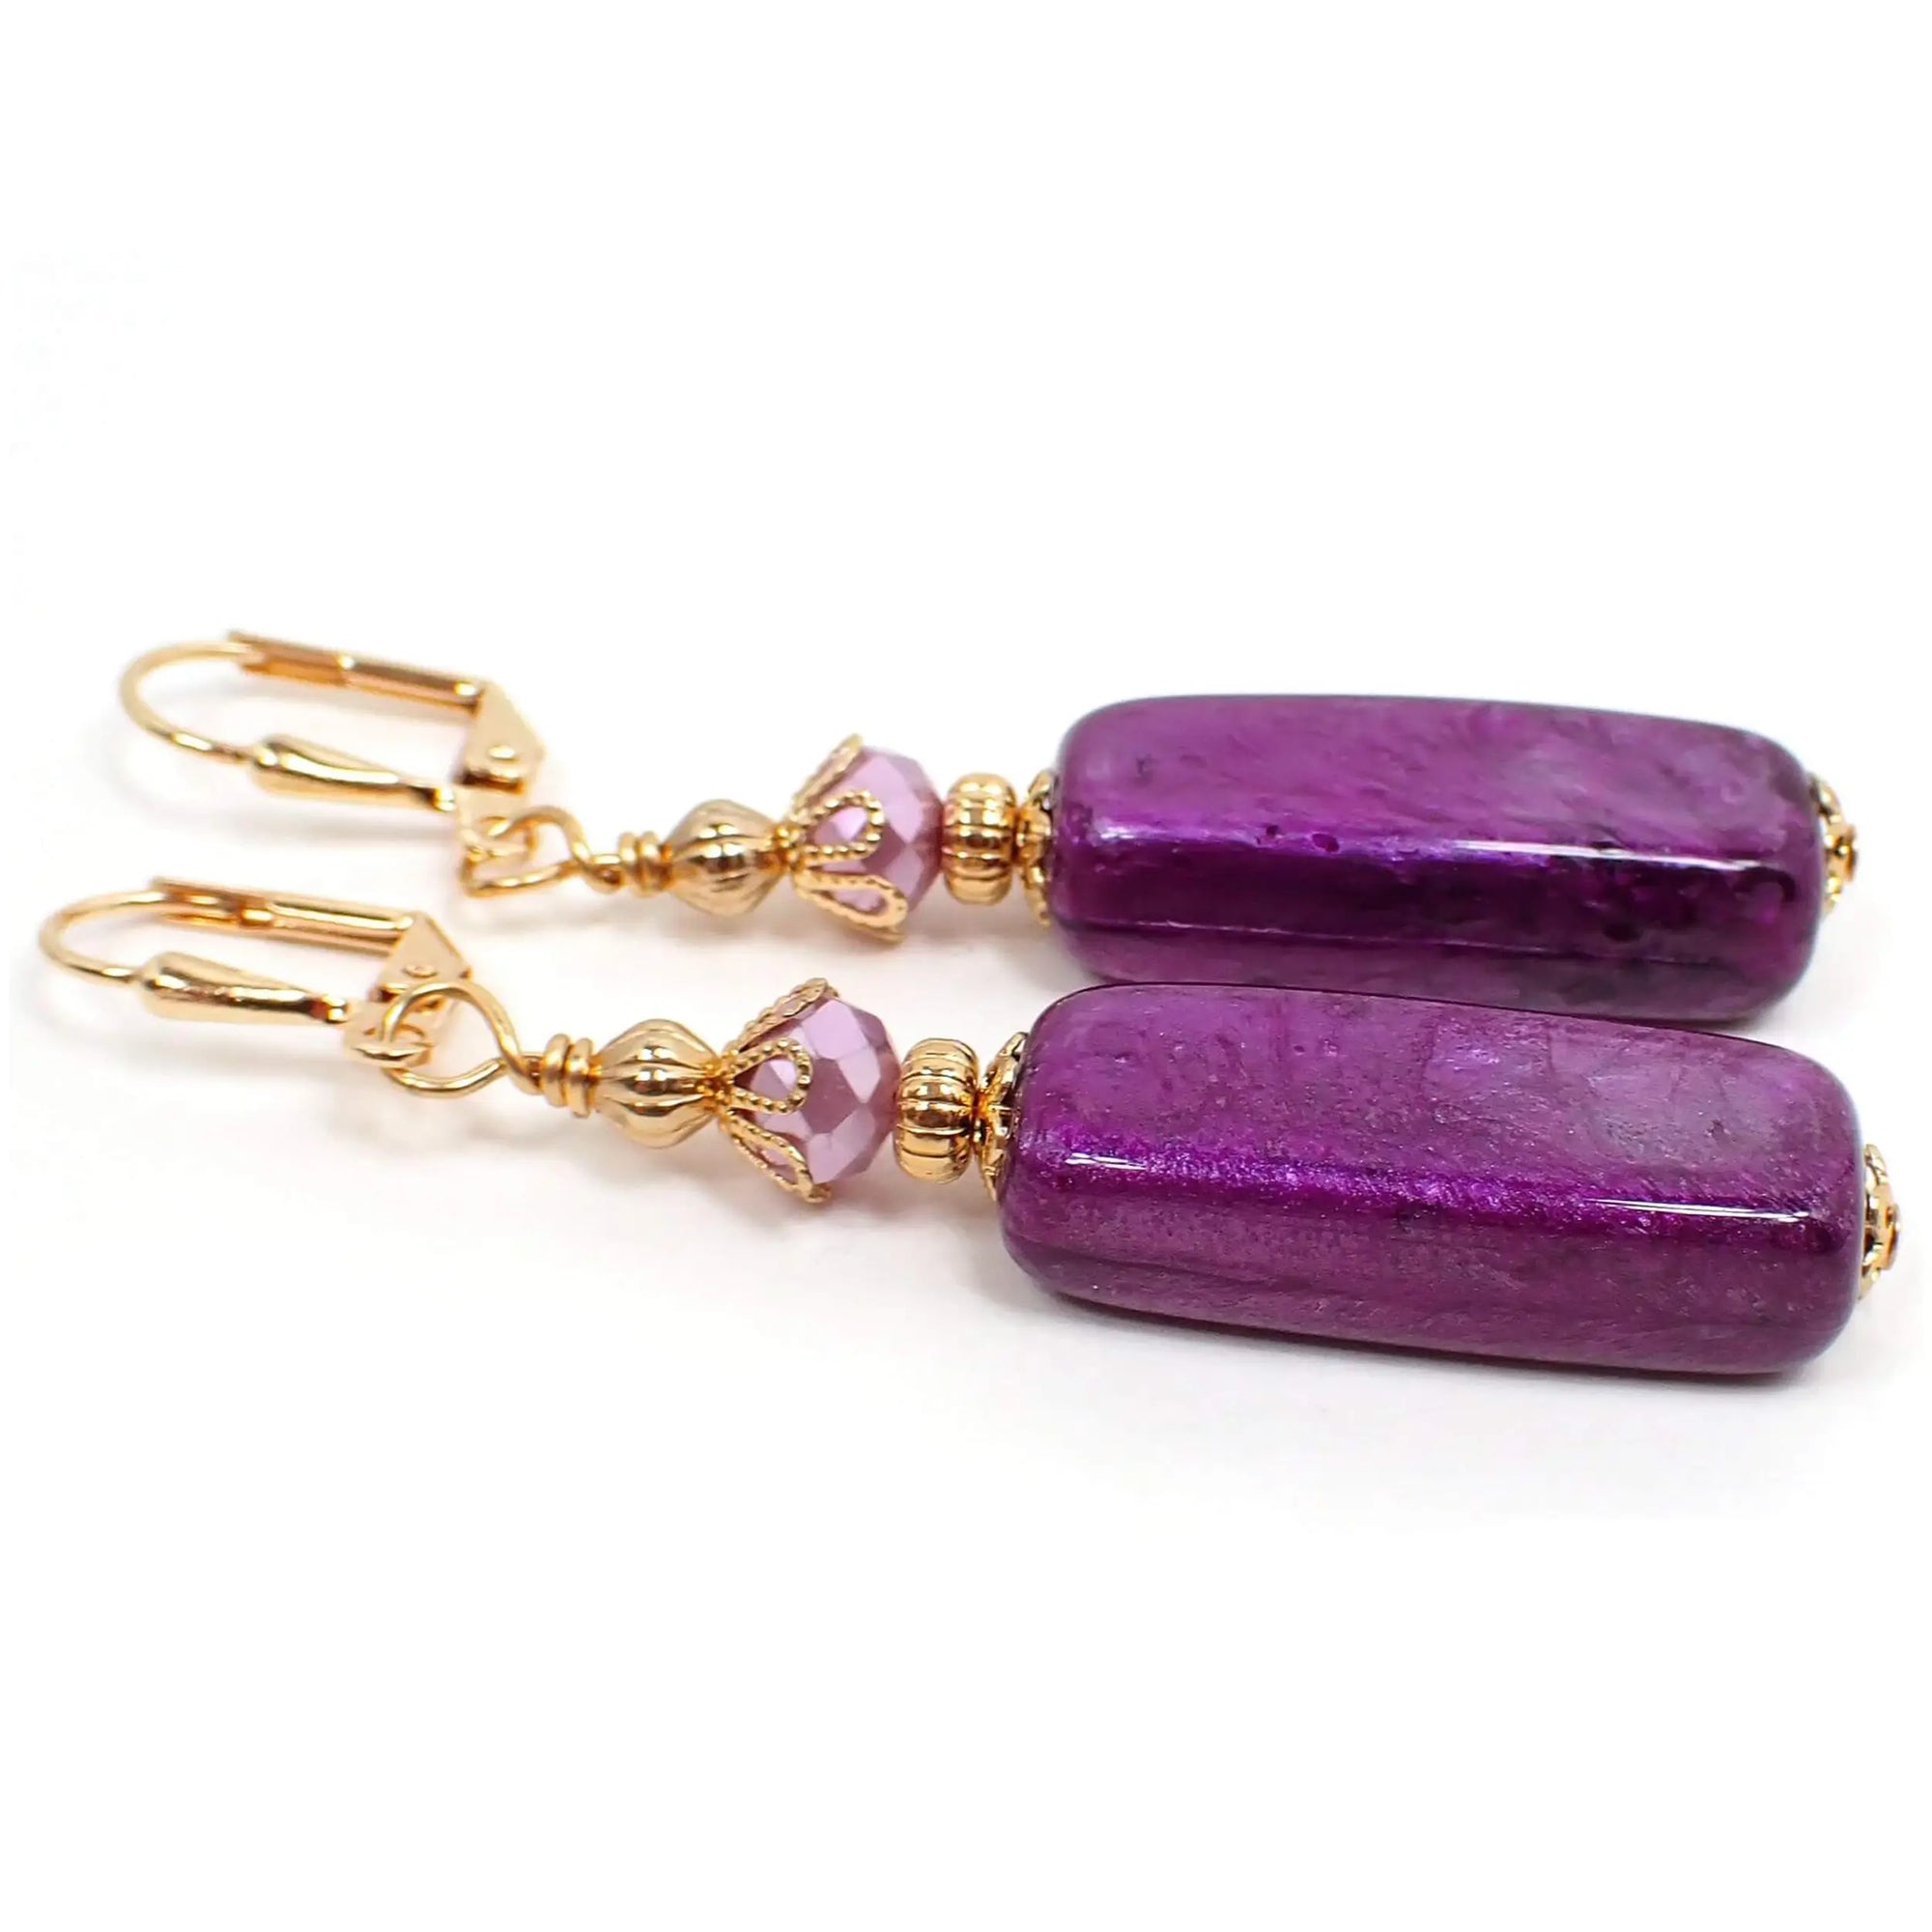 Side view of the handmade large stick earrings made with vintage acrylic beads. The metal is gold plated in color. There are faceted glass crystals at the top of the earrings in an opaque pastel purple color. The bottom acrylic beads are long larger sized acrylic beads with a pearly vivid purple color.